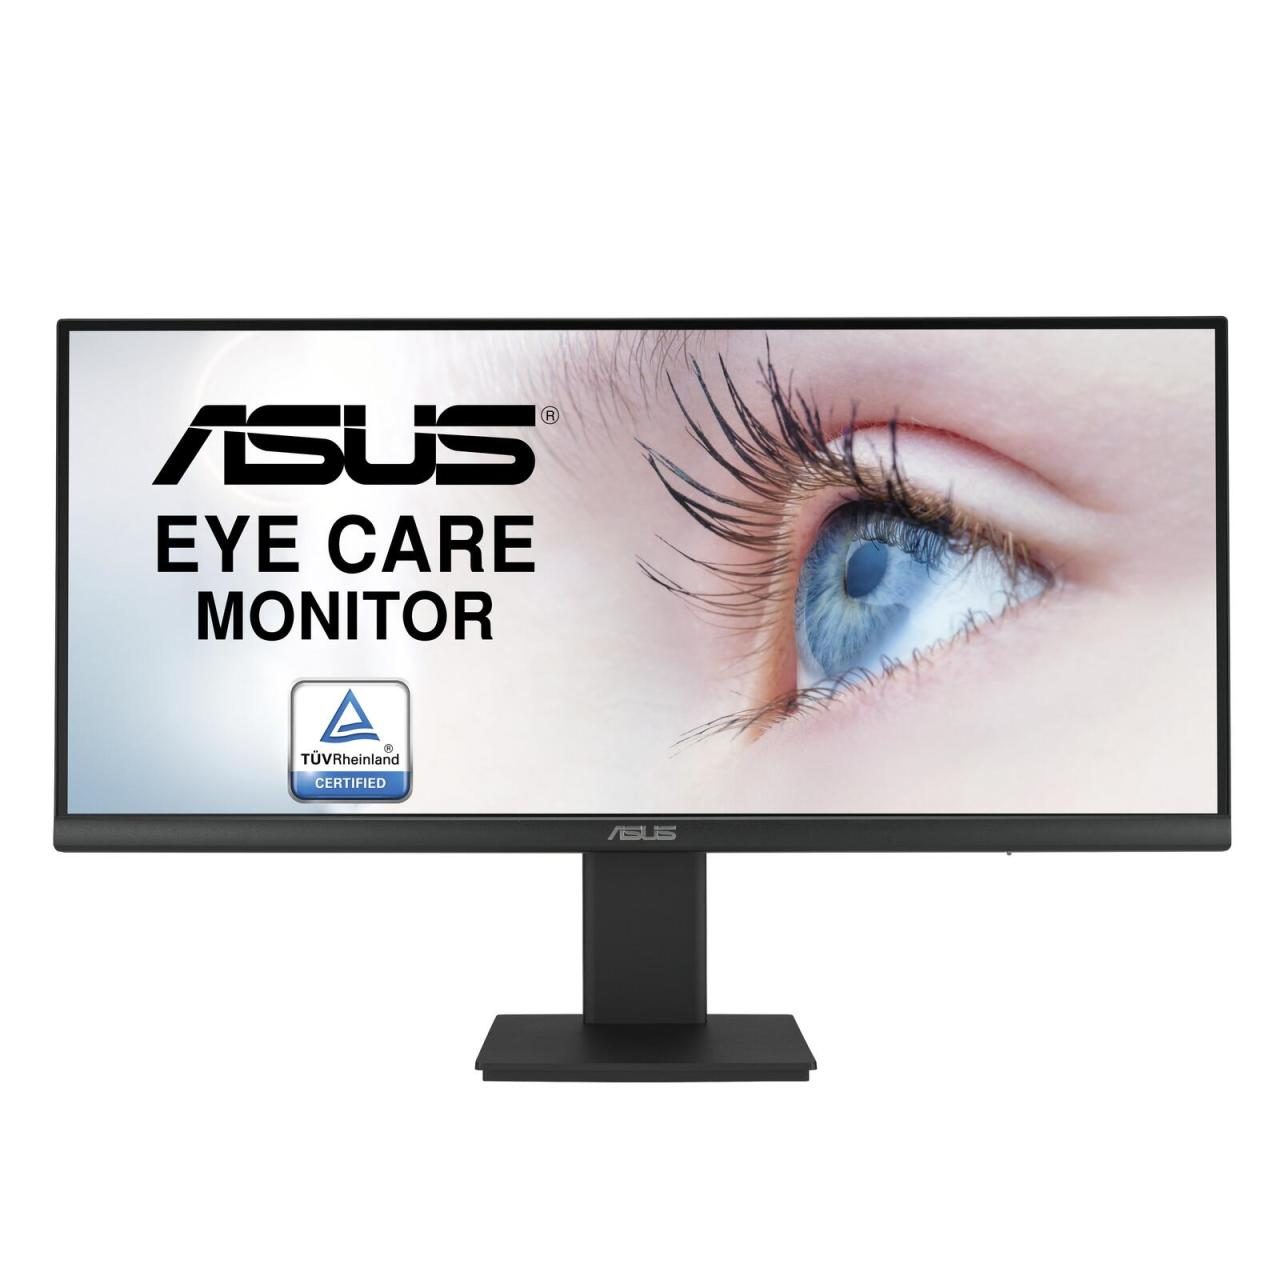 ASUS VP299CL Eye Care Monitor 73,7 cm (29 Zoll) von ASUS